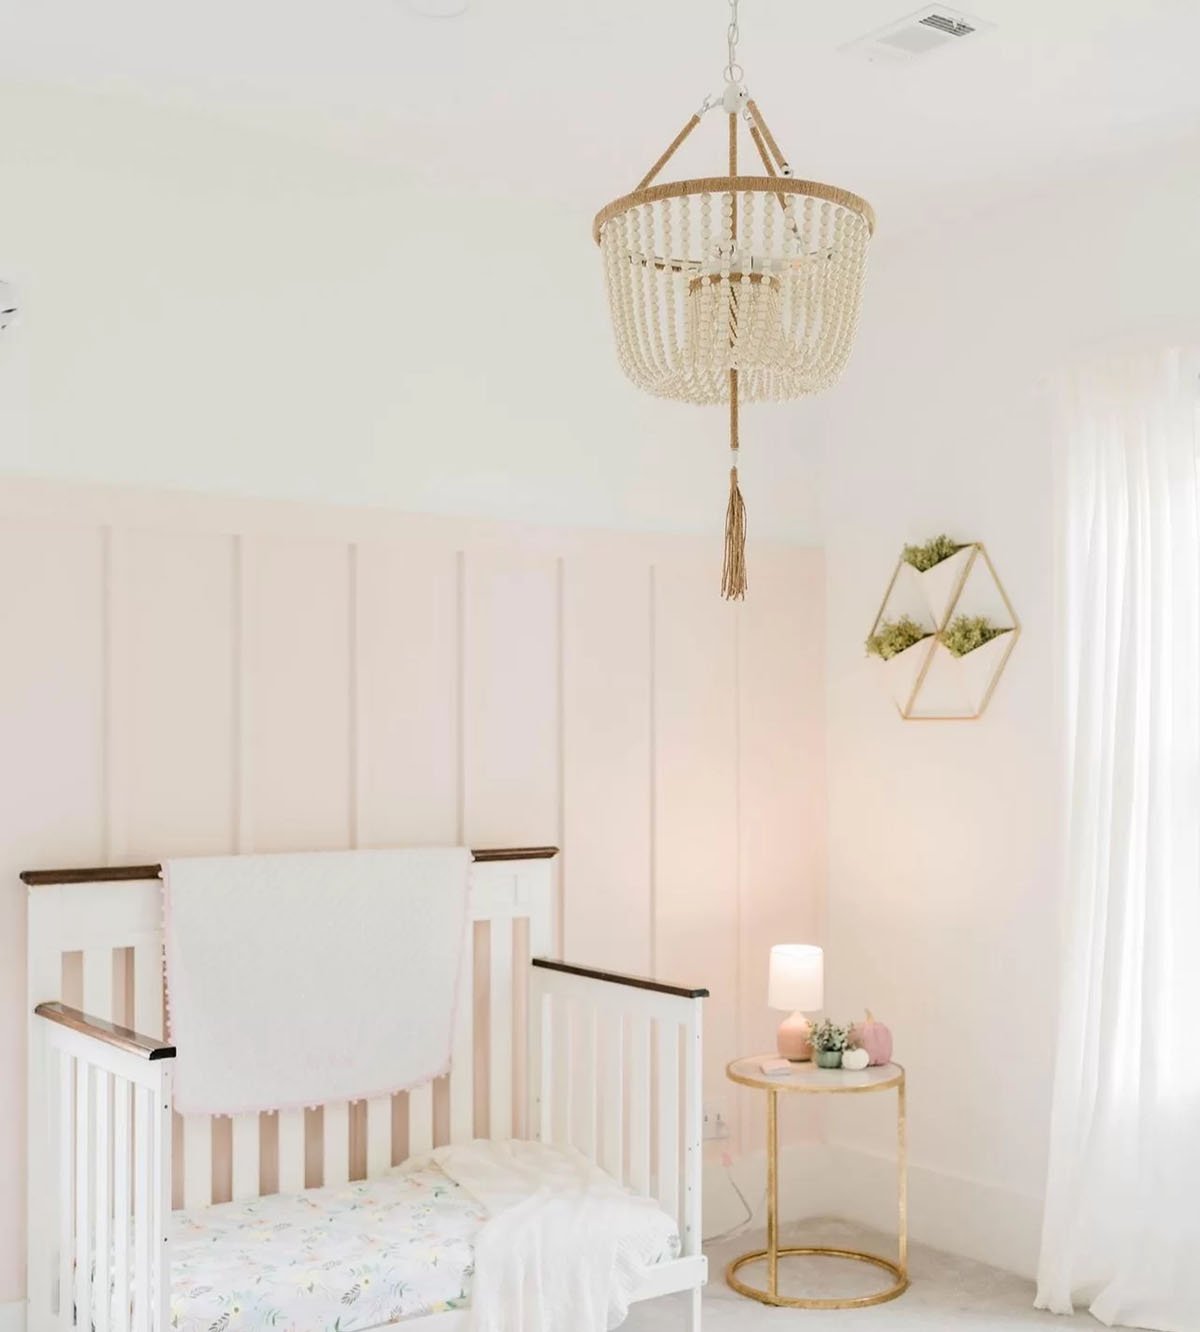 Sherwin Williams Intimate White as an accent wall in a nursery with warm white and gold accents.